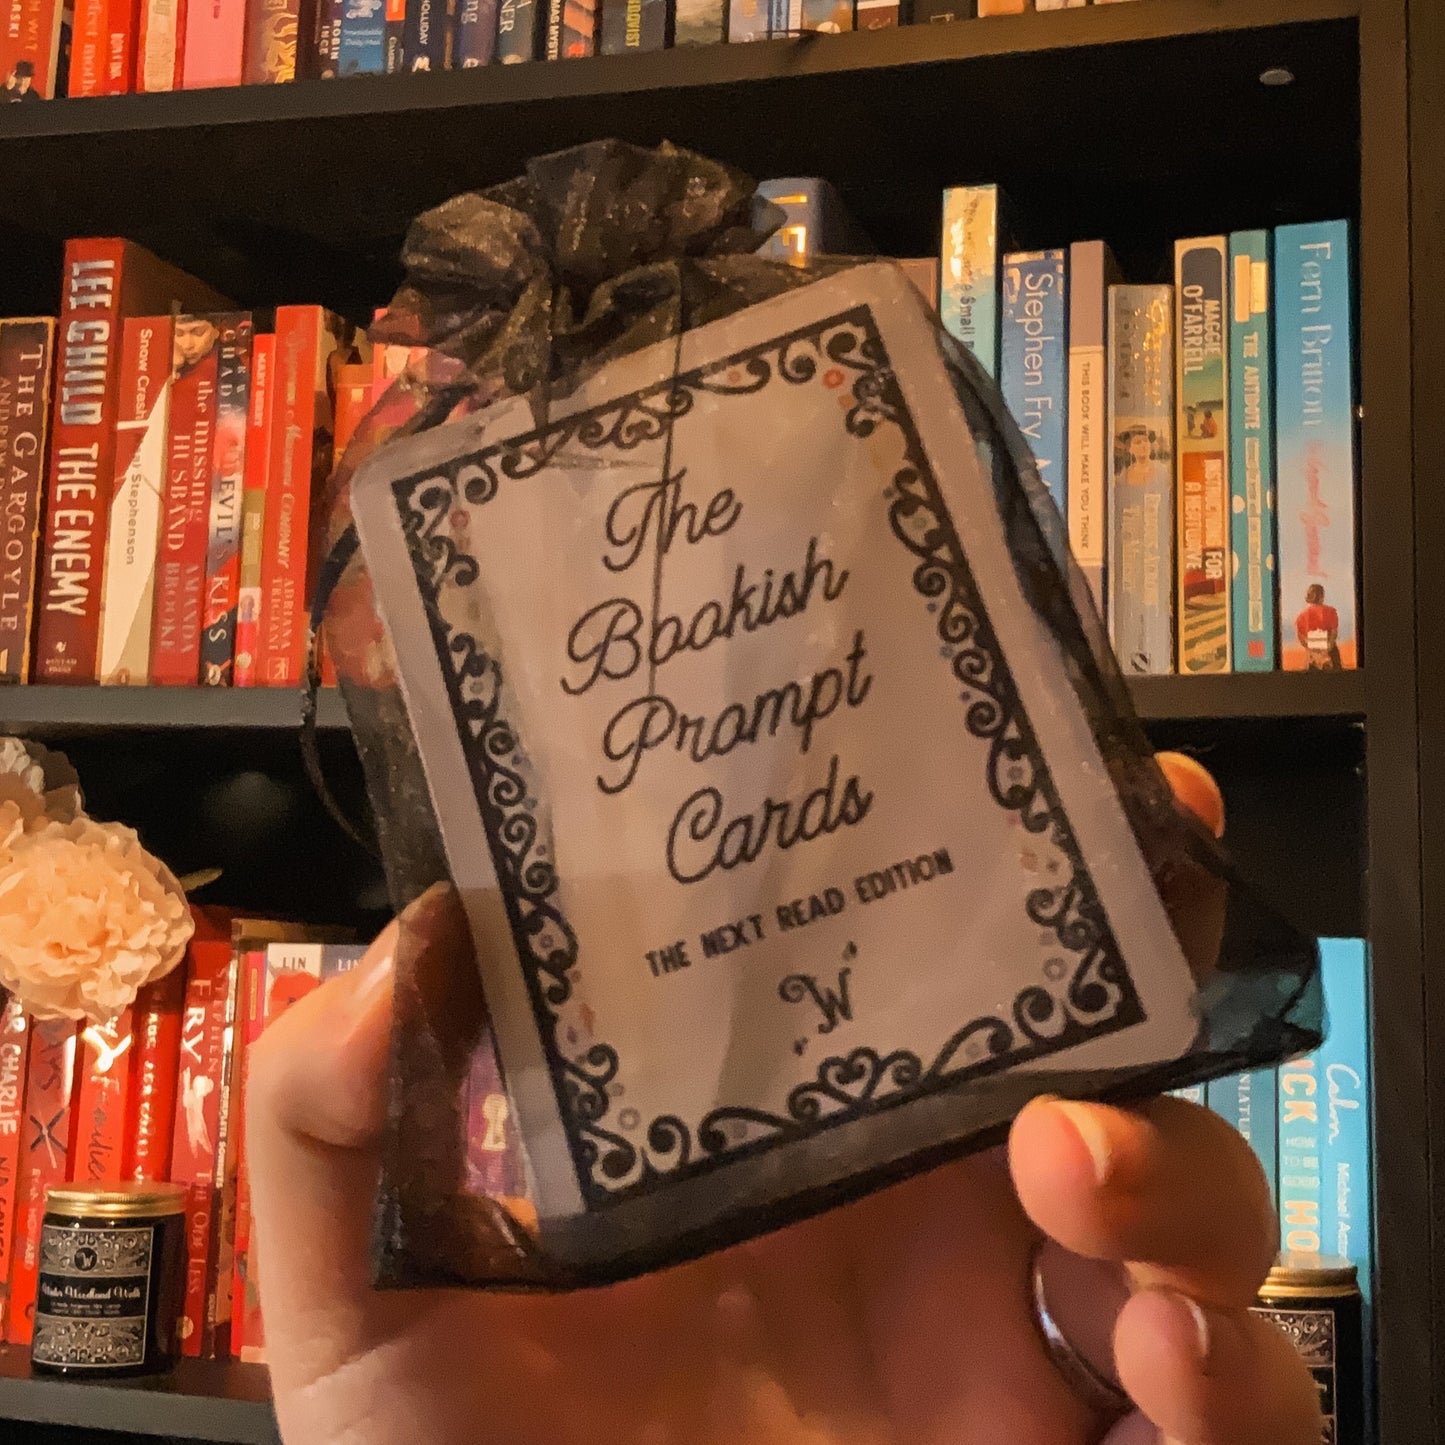 Bookish Prompt Cards - Next Read Edition